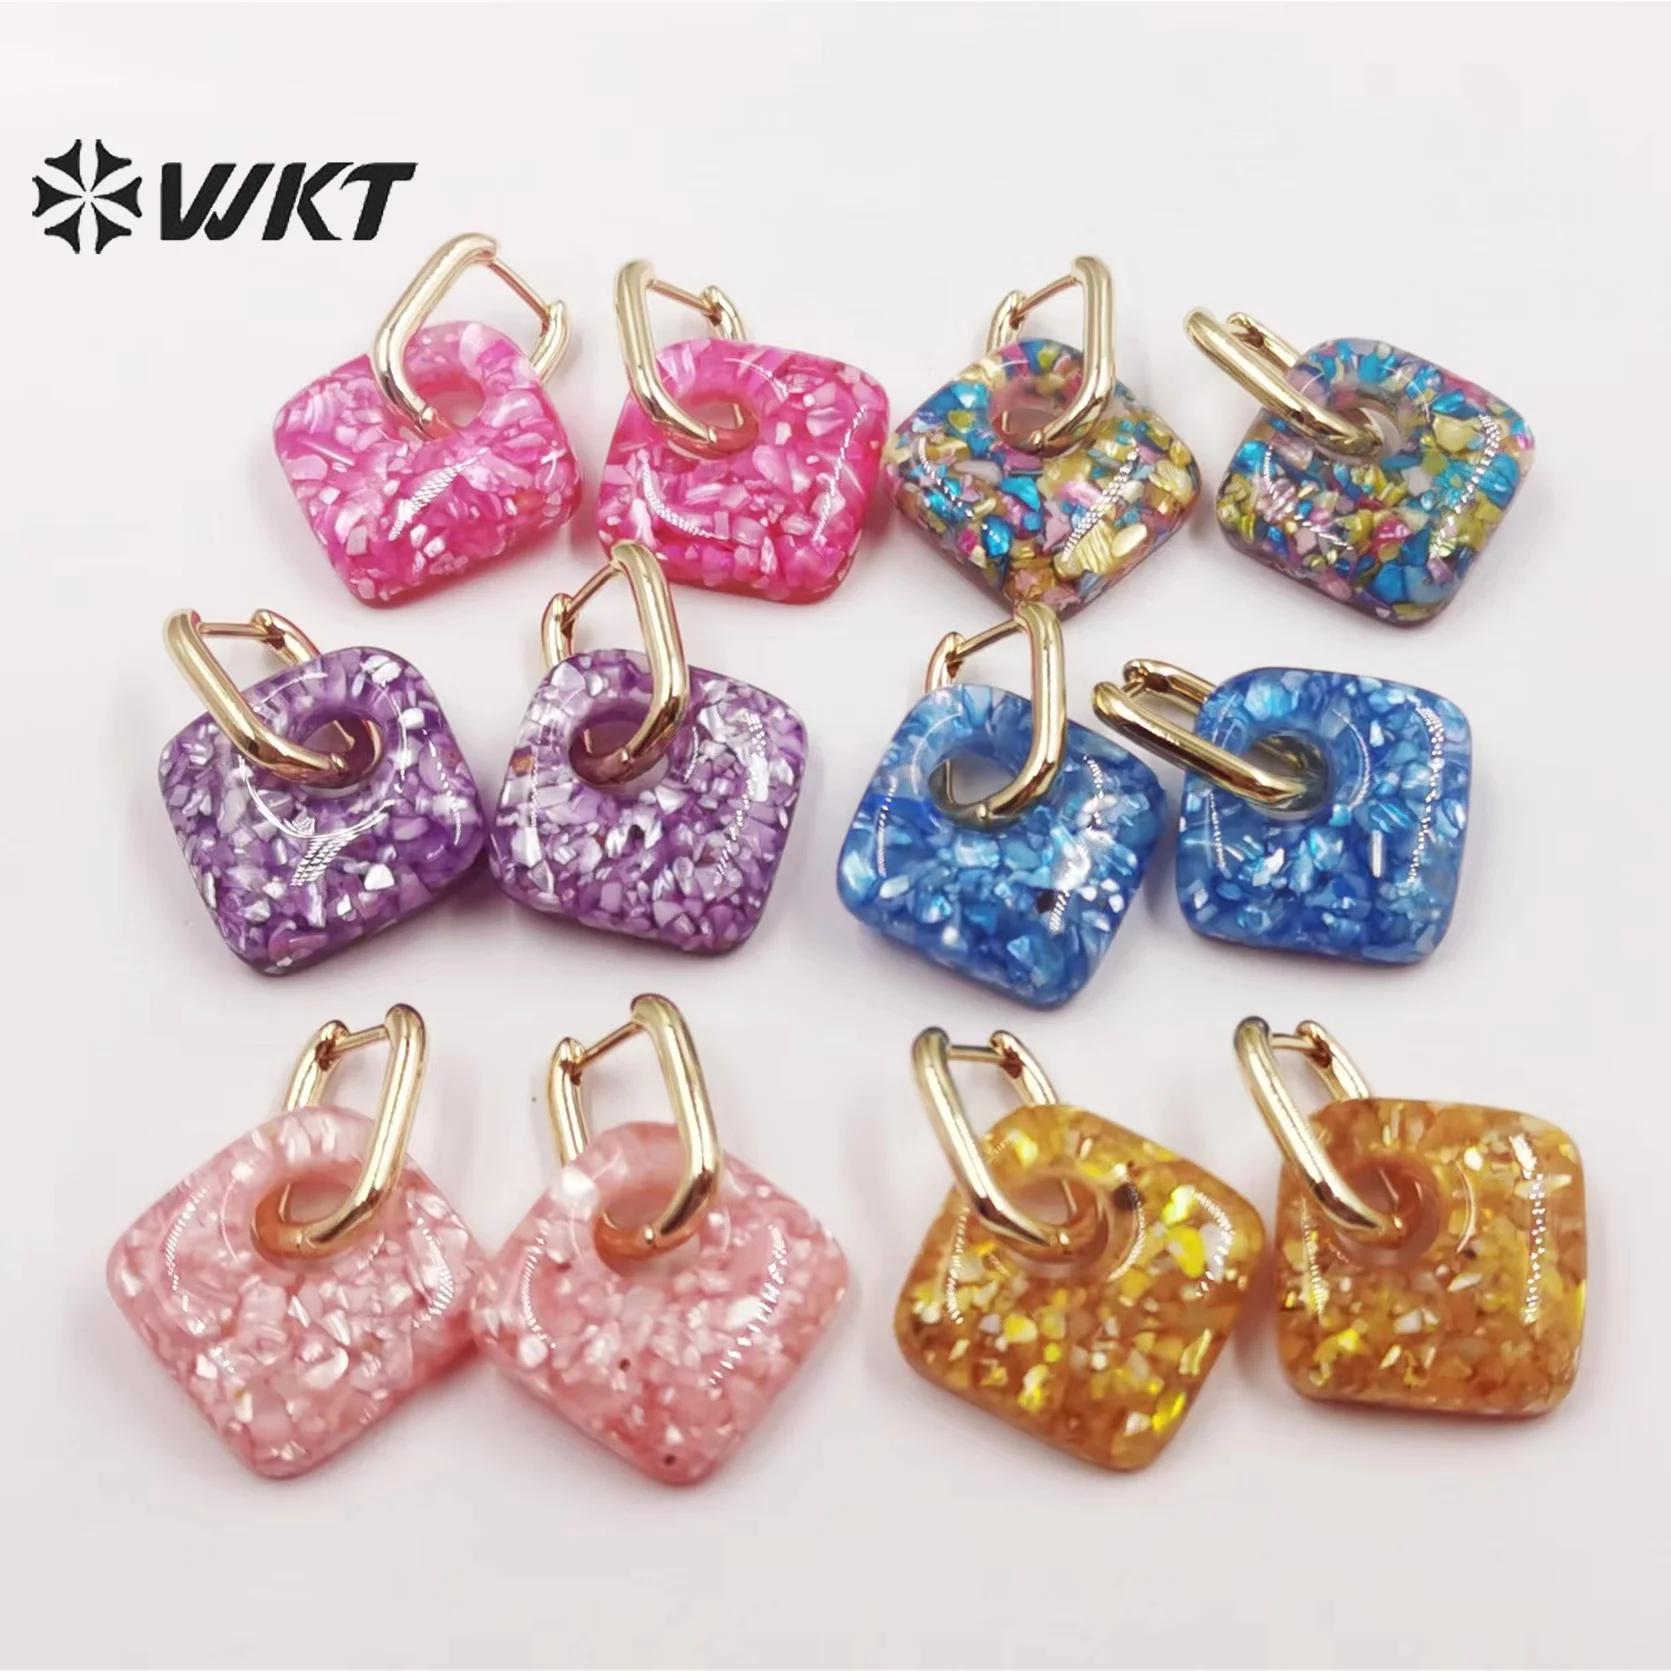 

WT-MPE073 WKT 2022 Natural Tiny Shell With Enamel Cute Style Earrings For Women Party Jewelry INS Gift Wedding